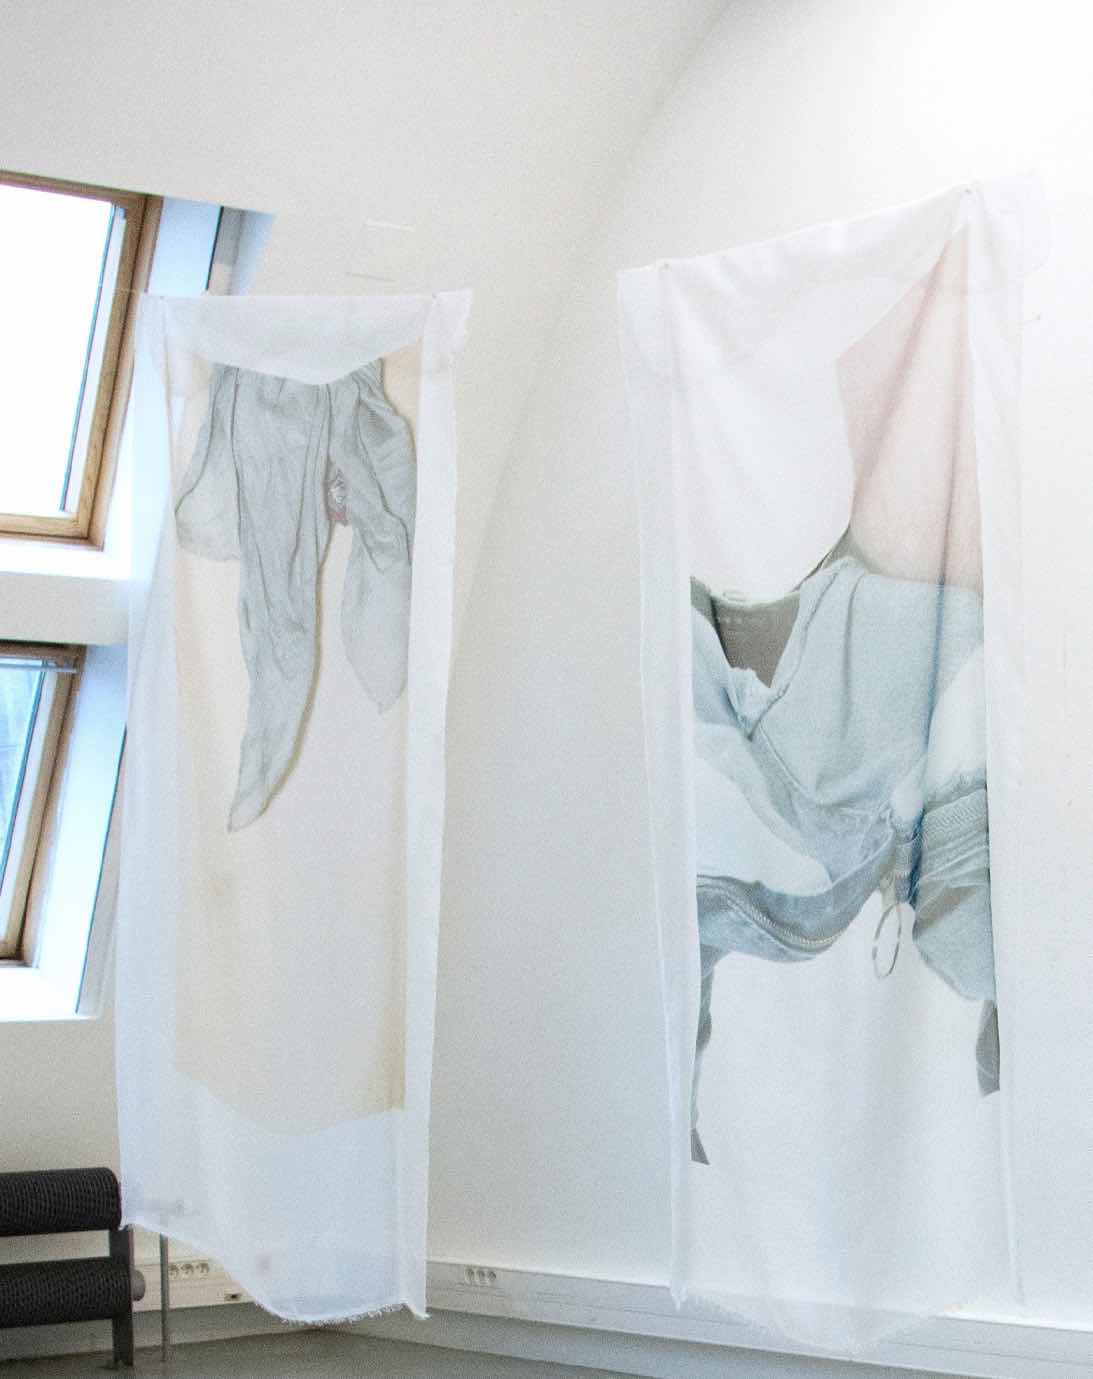 Two polyester silks hanging from the ceiling. Printed onto the silk are photographs of a closeup view of a leg with the jeans pants stripped down to the foot and another photograph zoomed up to a male chest 
            with a blue scarf around the neck. The nippel and the nipplehair is barely visbile.